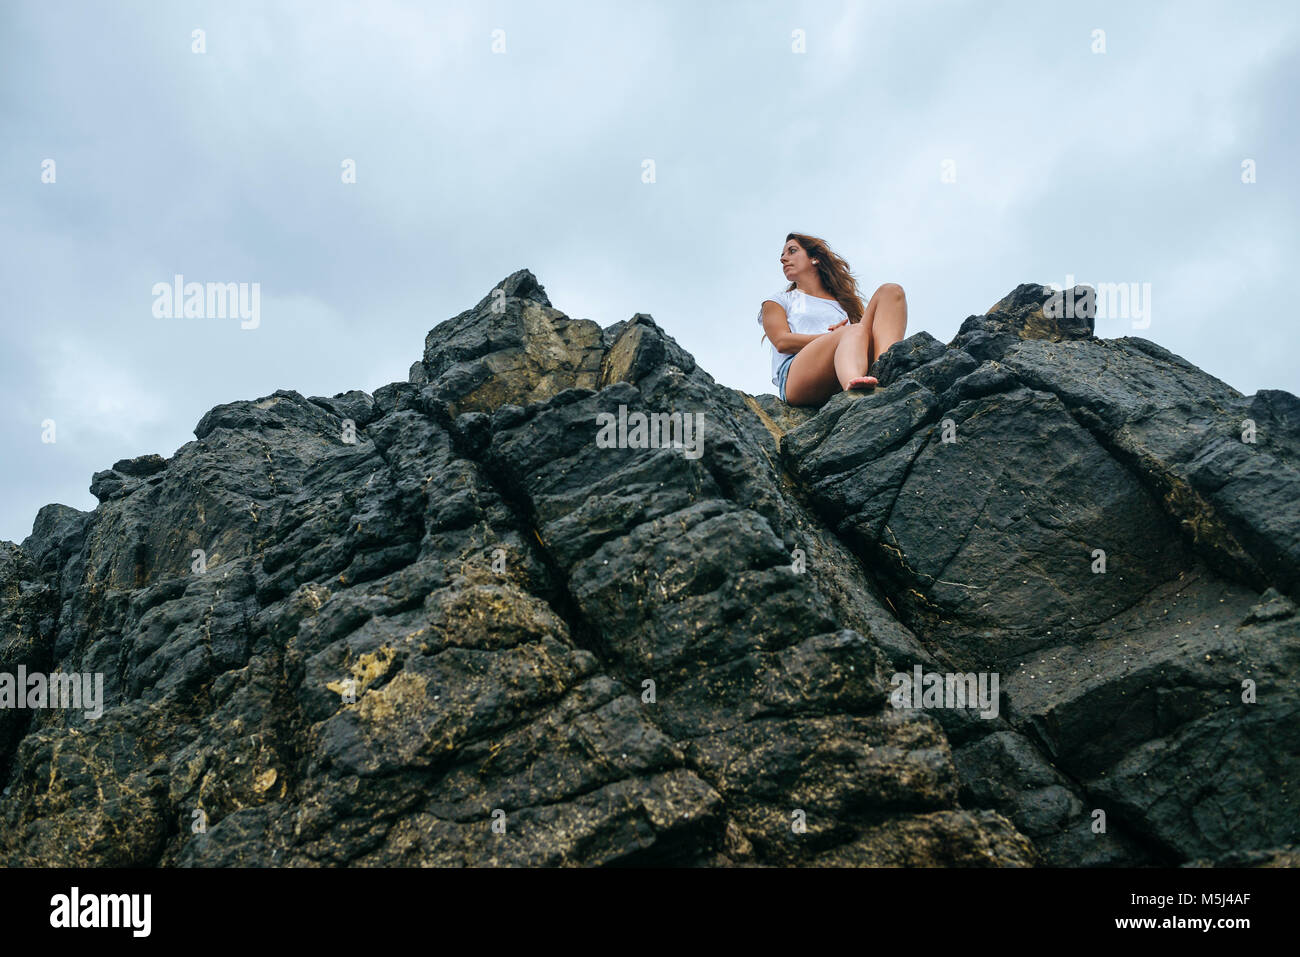 Costa Rica, Woman sitting on rocks, view from below Stock Photo